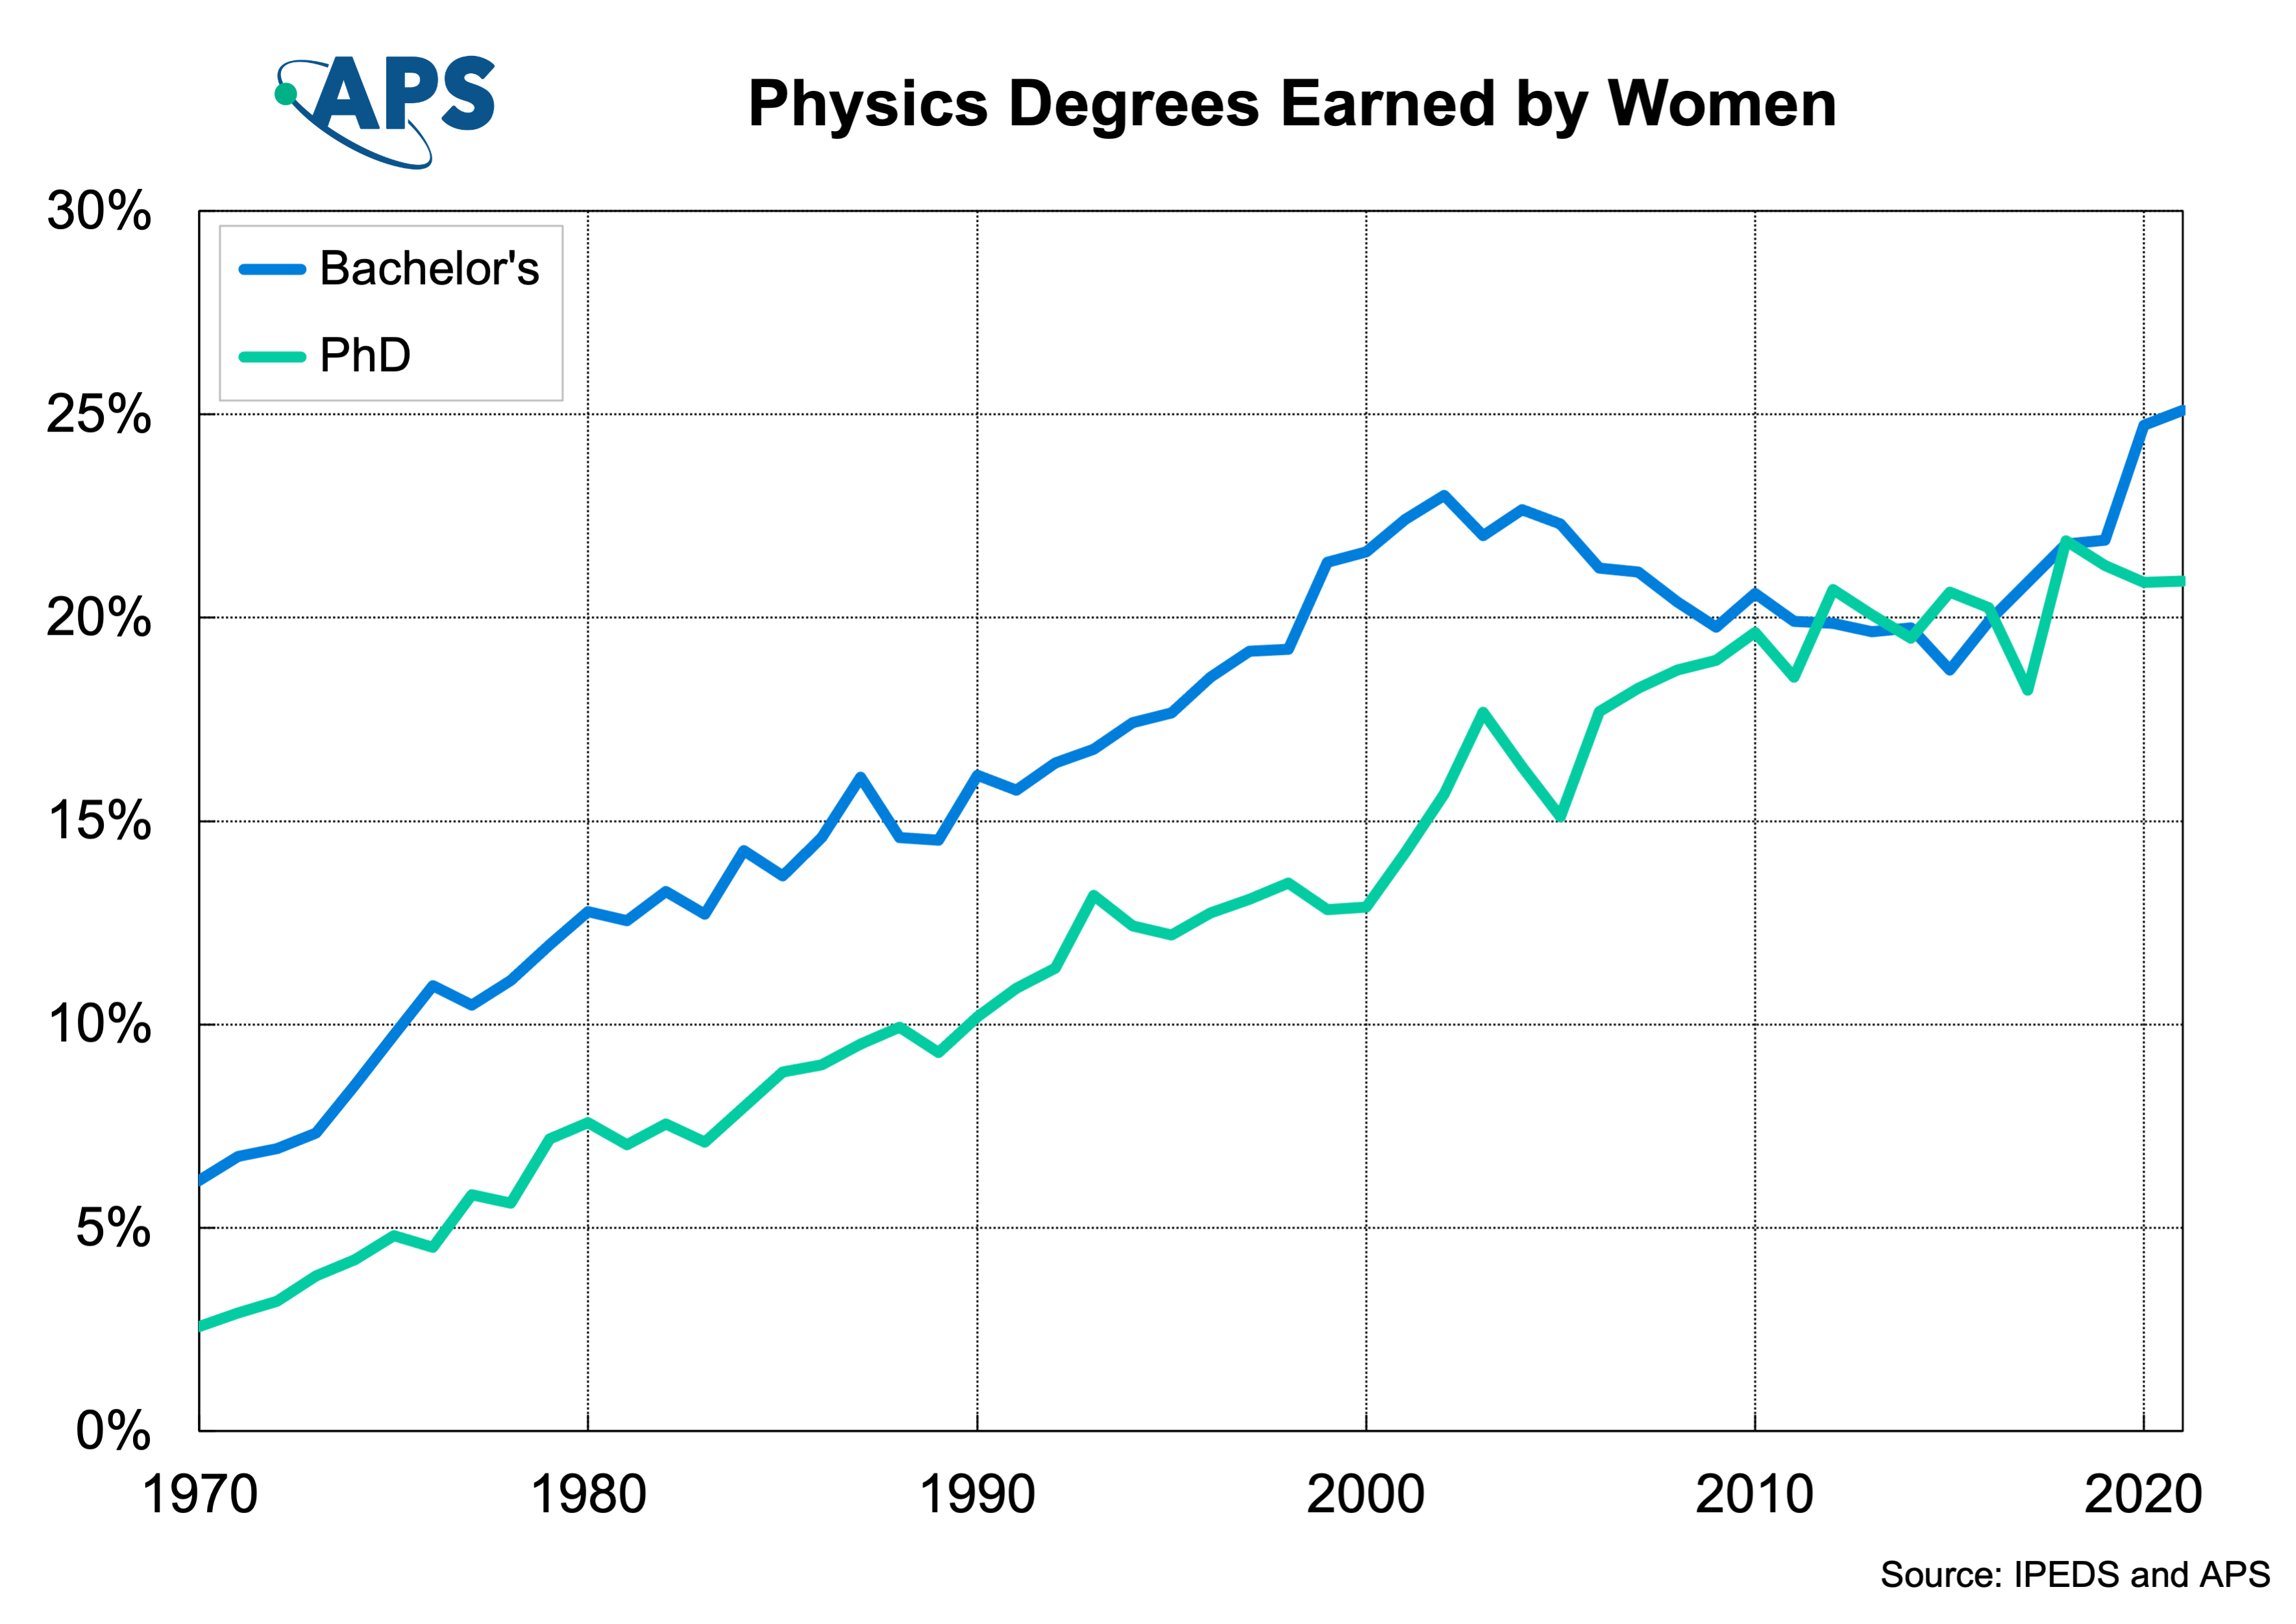 Graph for Physics Degrees Earned by Women